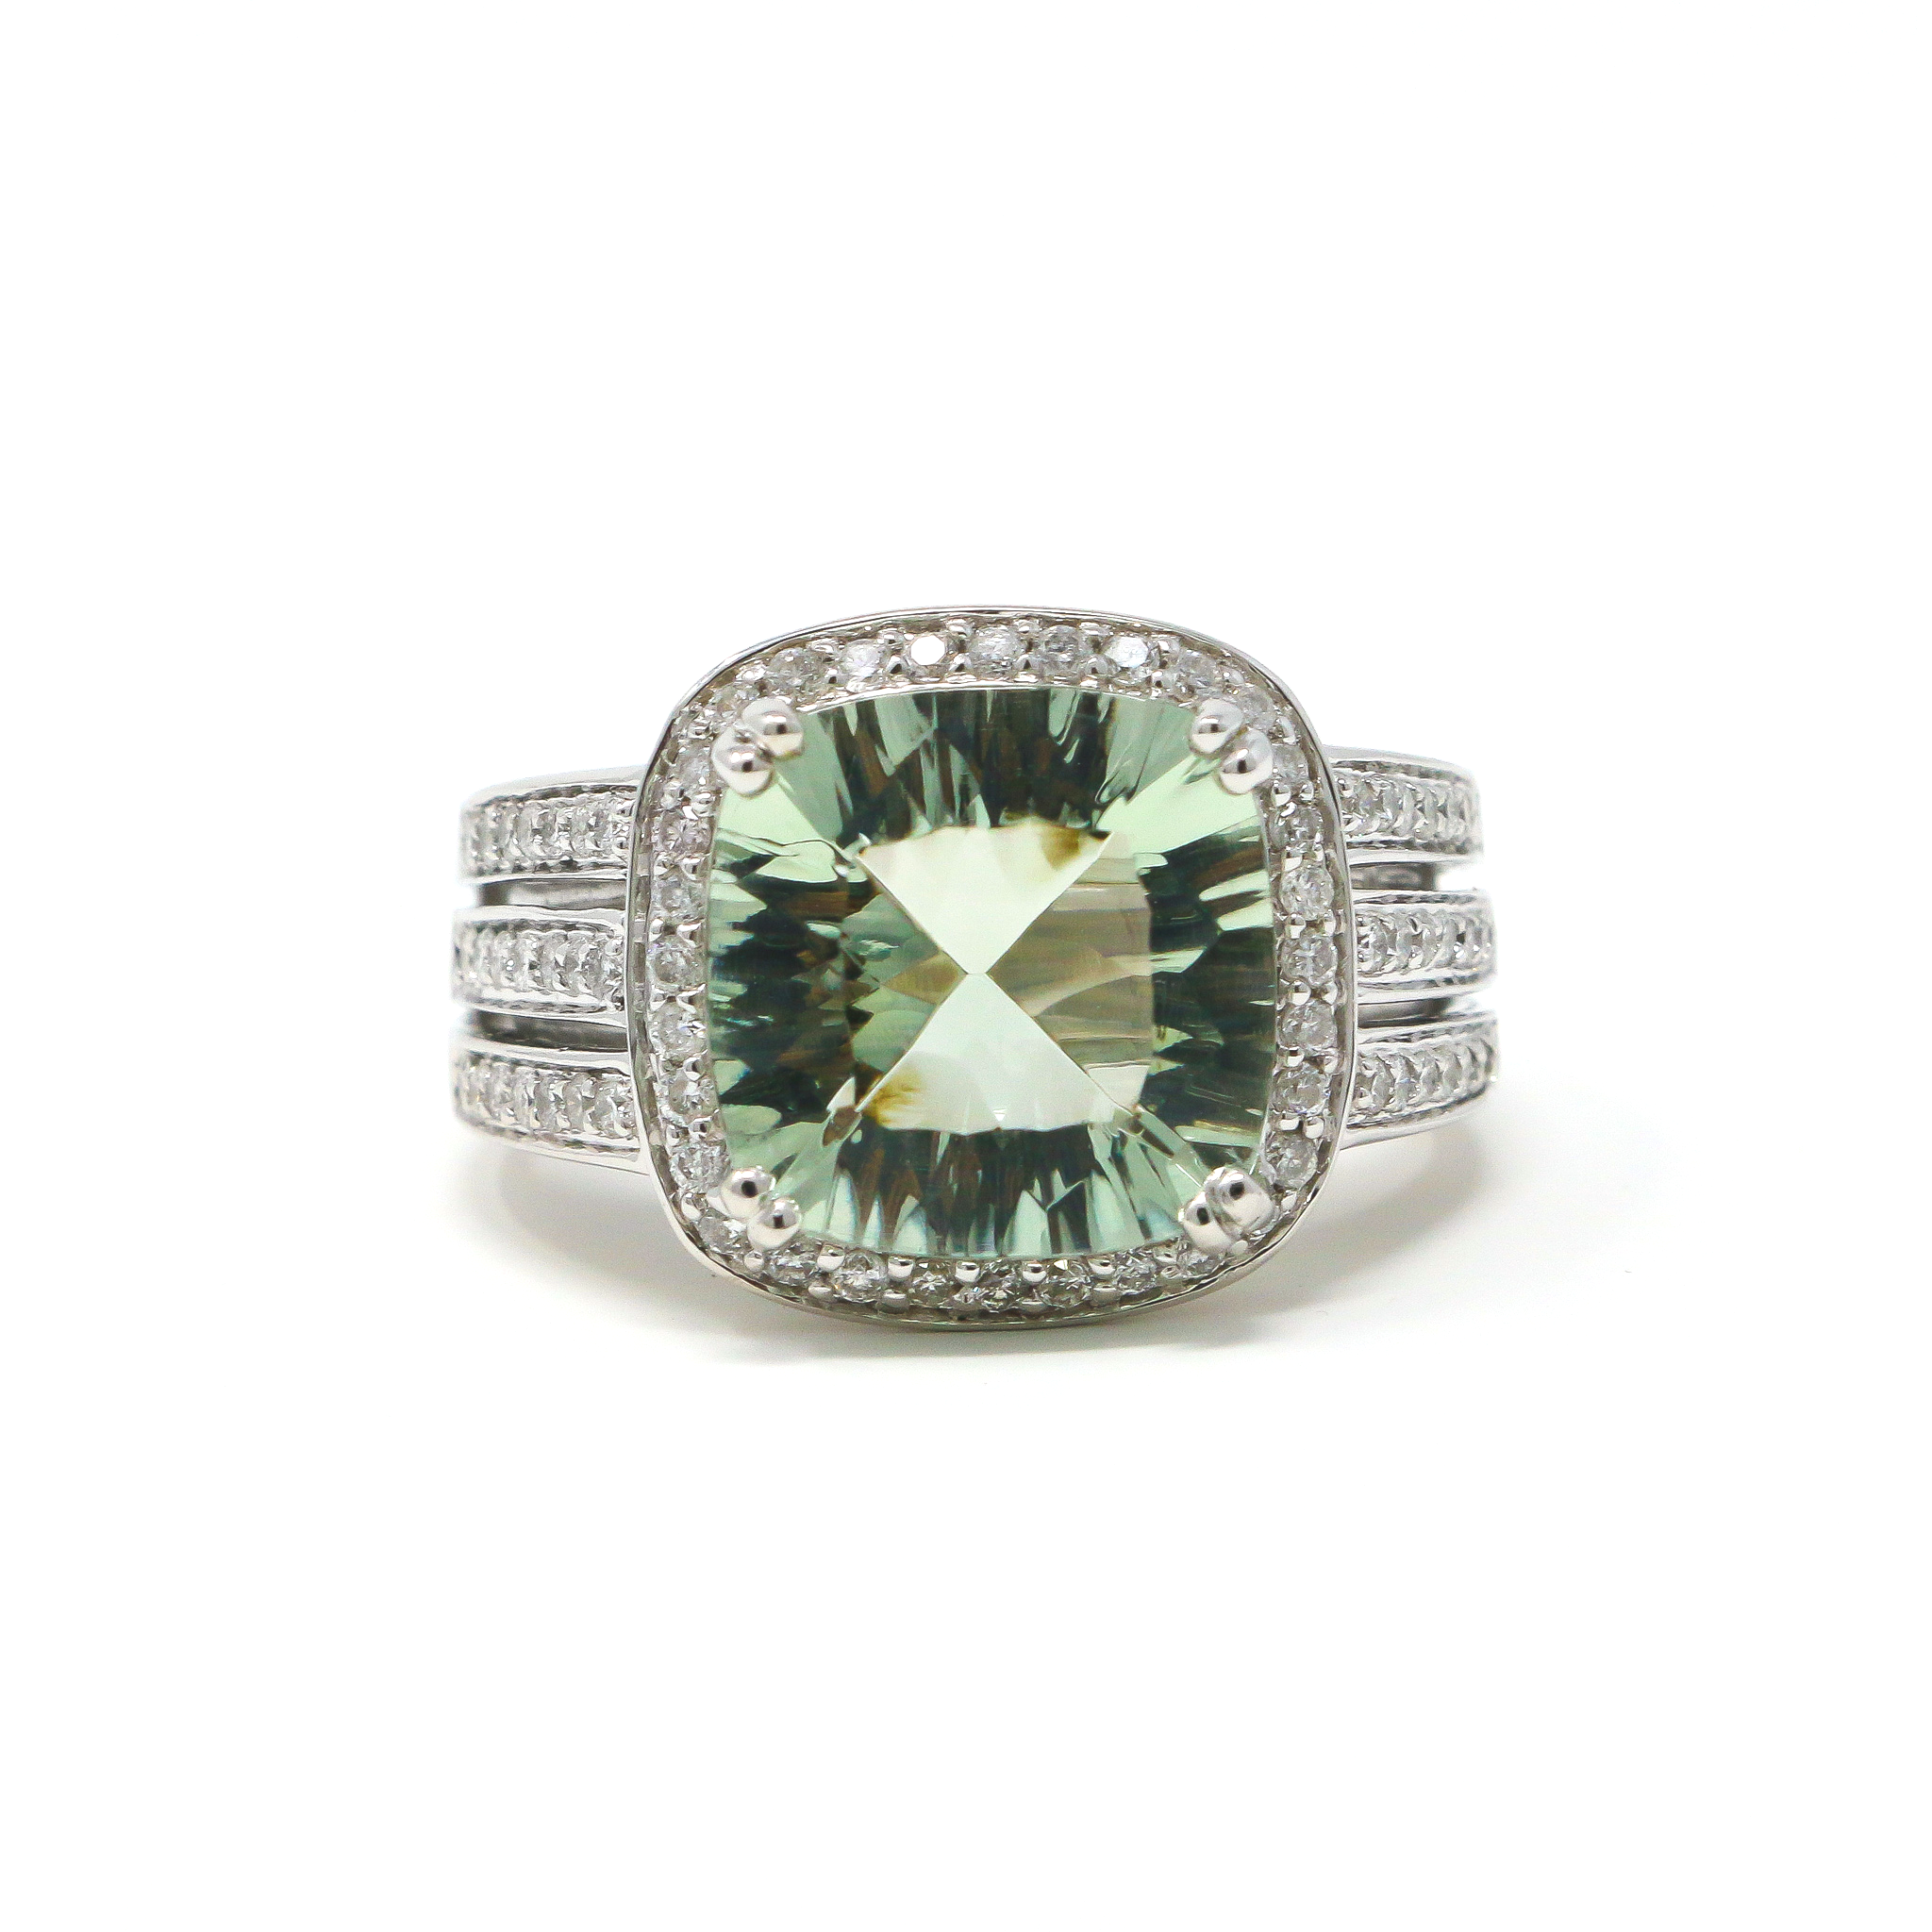 The Pacey Pear Rainforest Green Topaz Engagement Ring